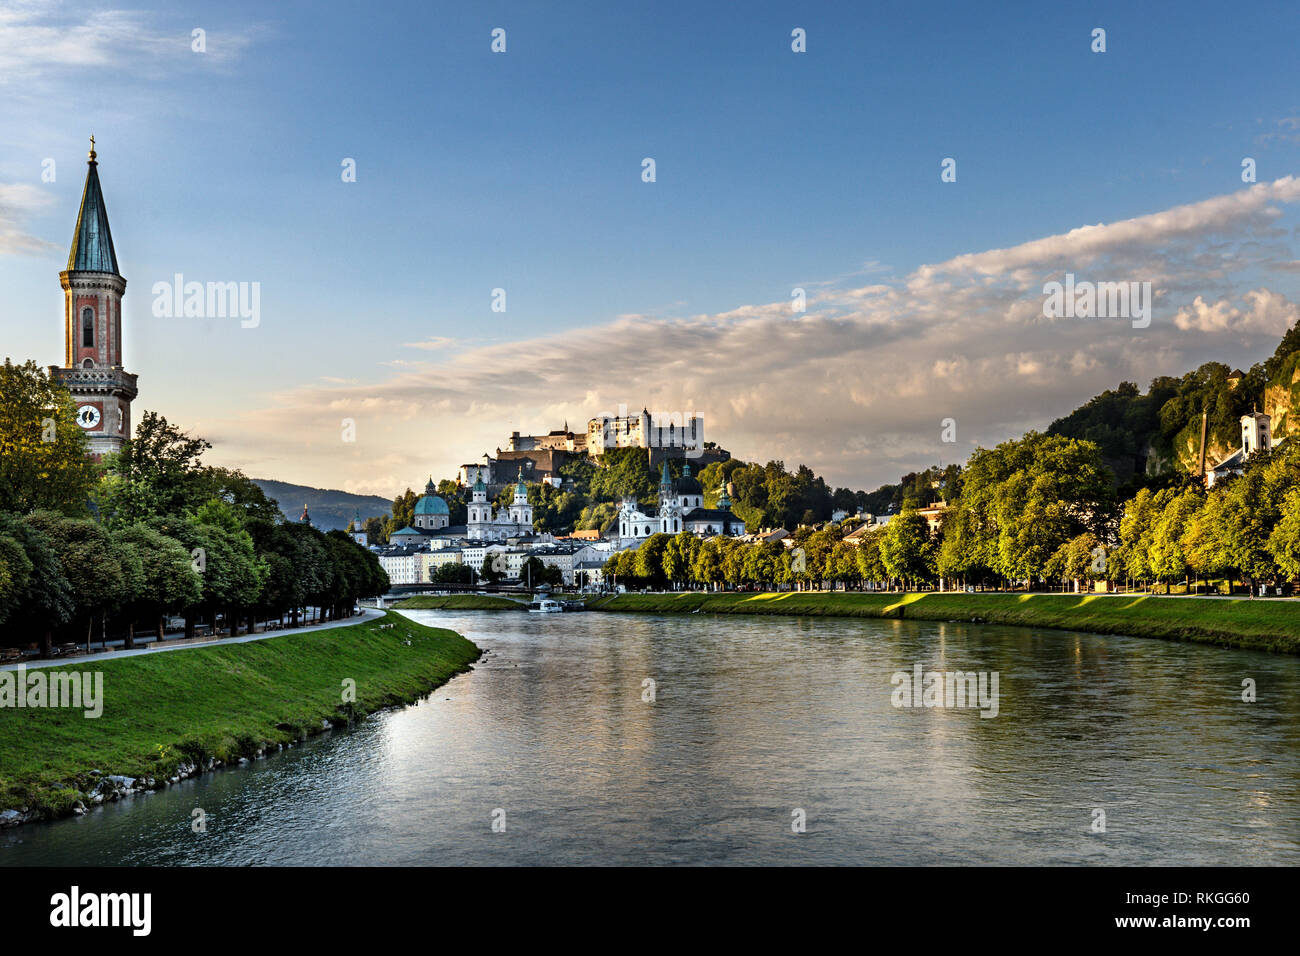 The Salzach River splits the Old Town from the New Town, with the Hohensalzburg Fortress in the distance, Salzburg, Austria. Stock Photo